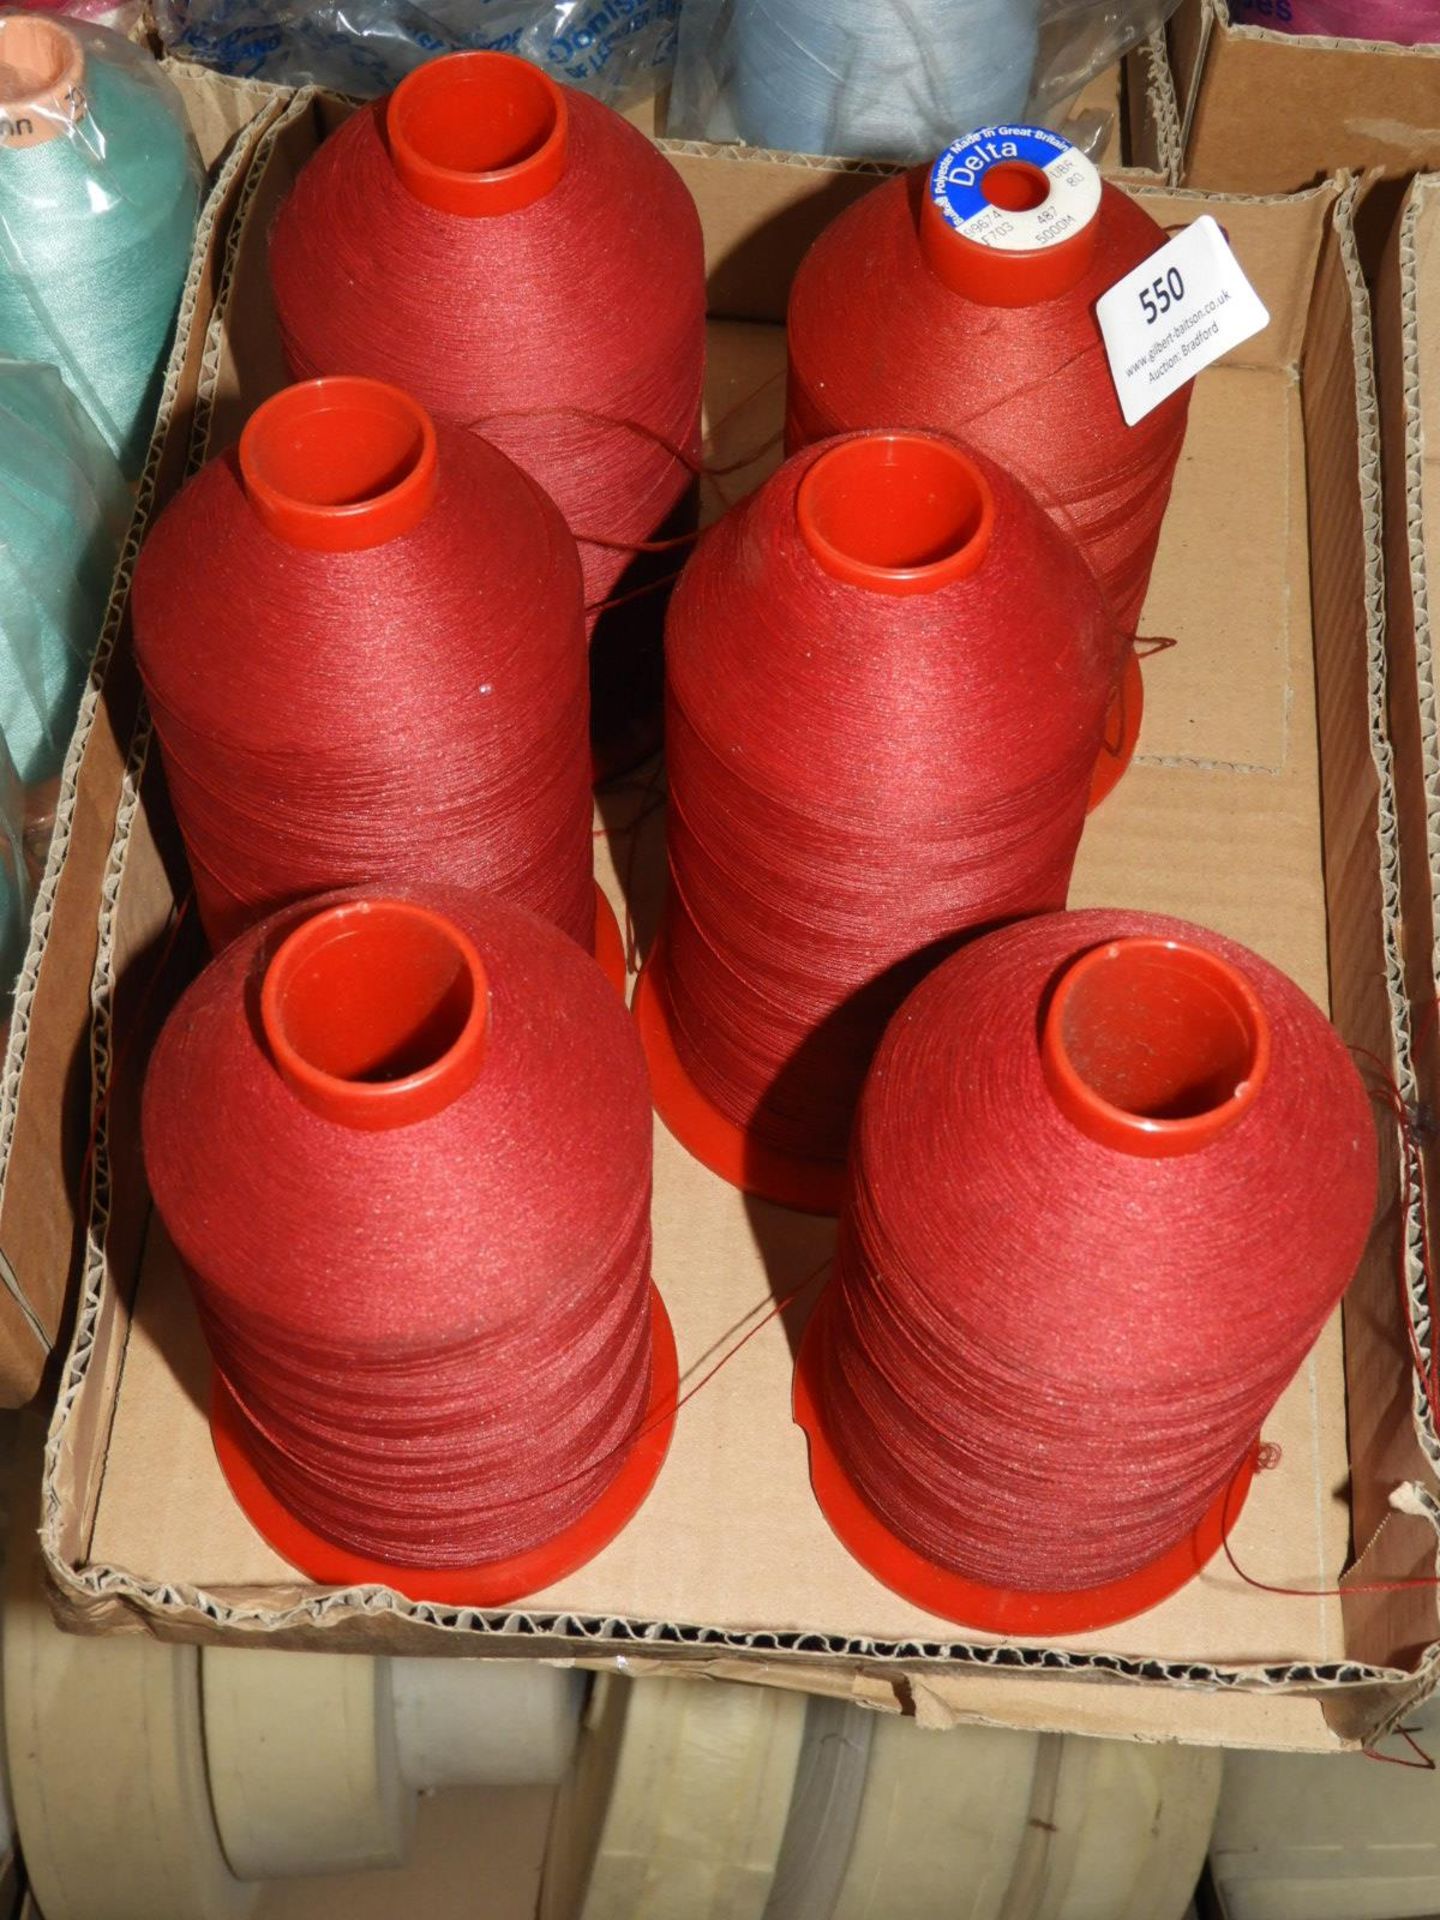 *Six Rolls of Red Sewing Thread